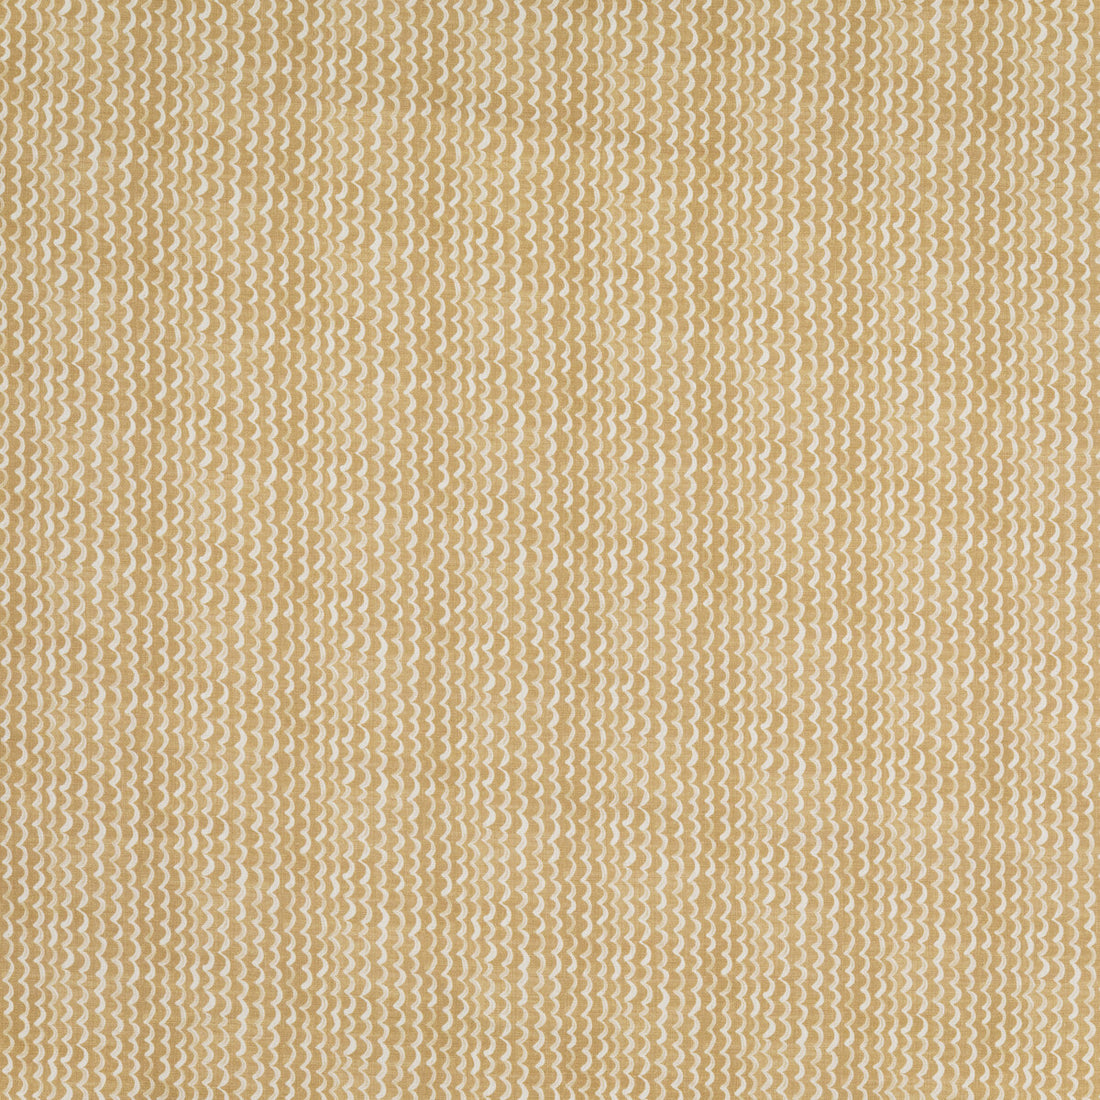 Camden fabric in gold color - pattern BFC-3704.4.0 - by Lee Jofa in the Blithfield Eden collection